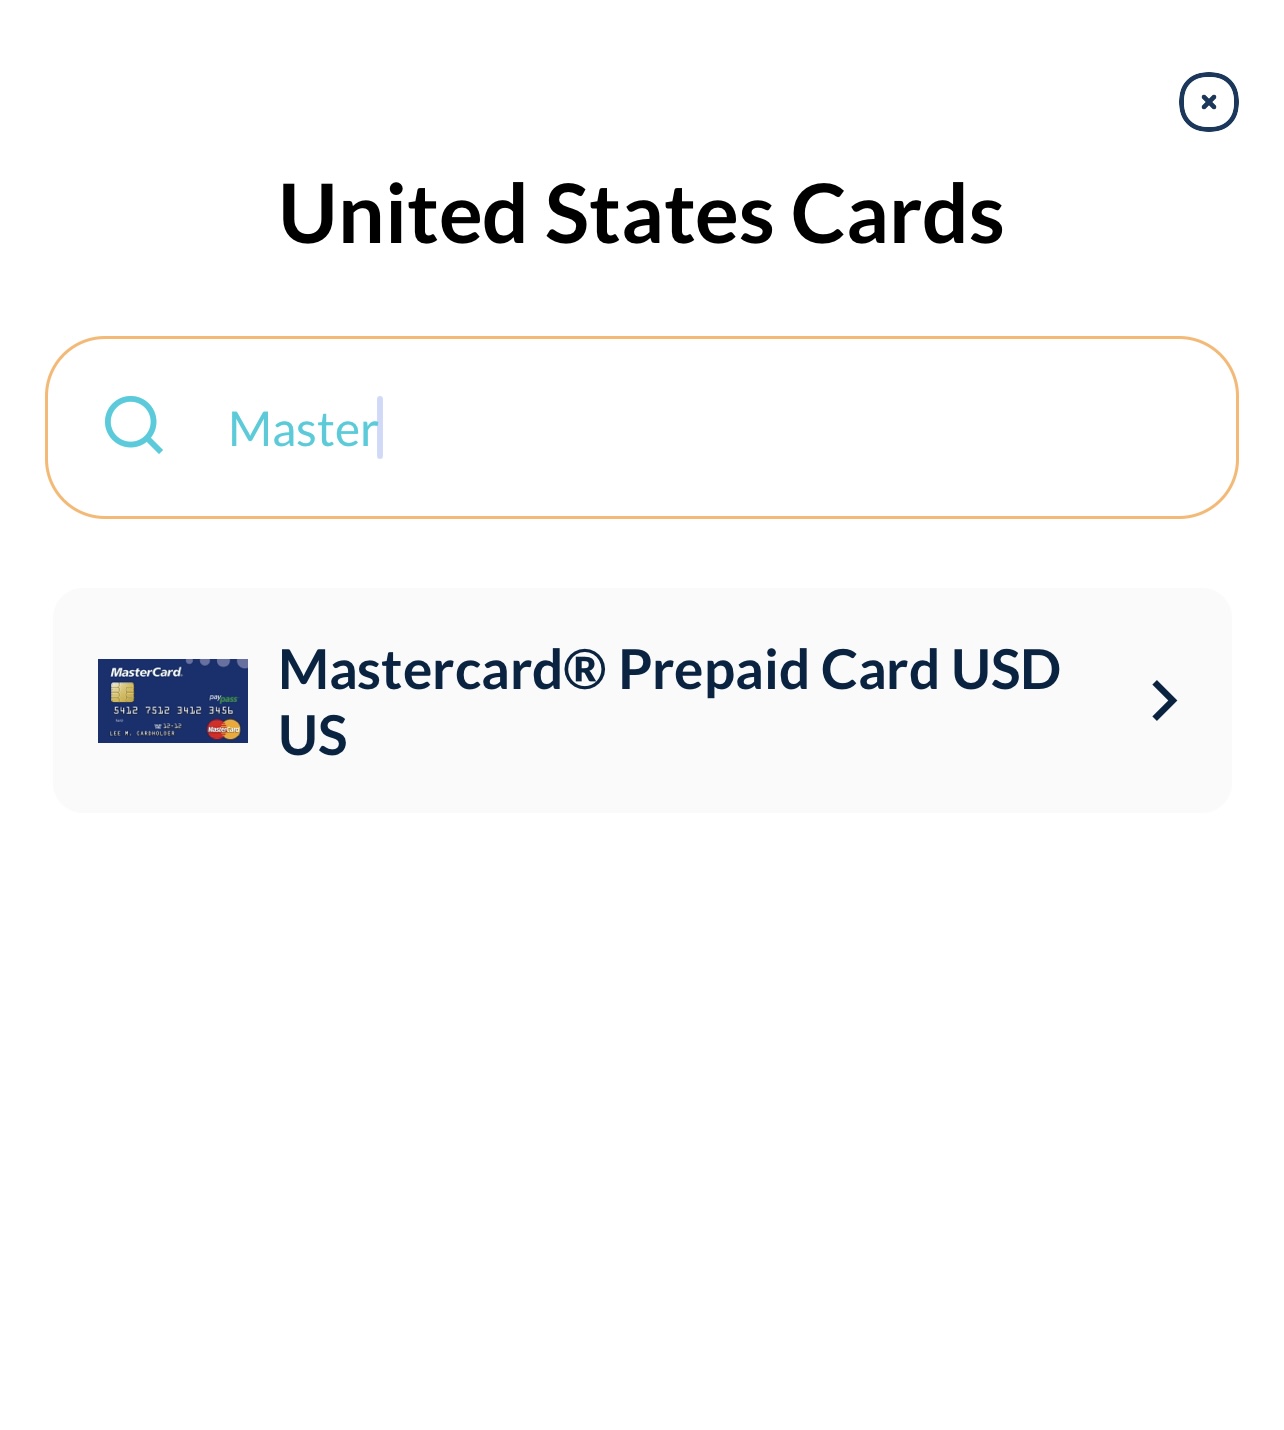 An image of the Mastercard gift card on the Cardtonic page.